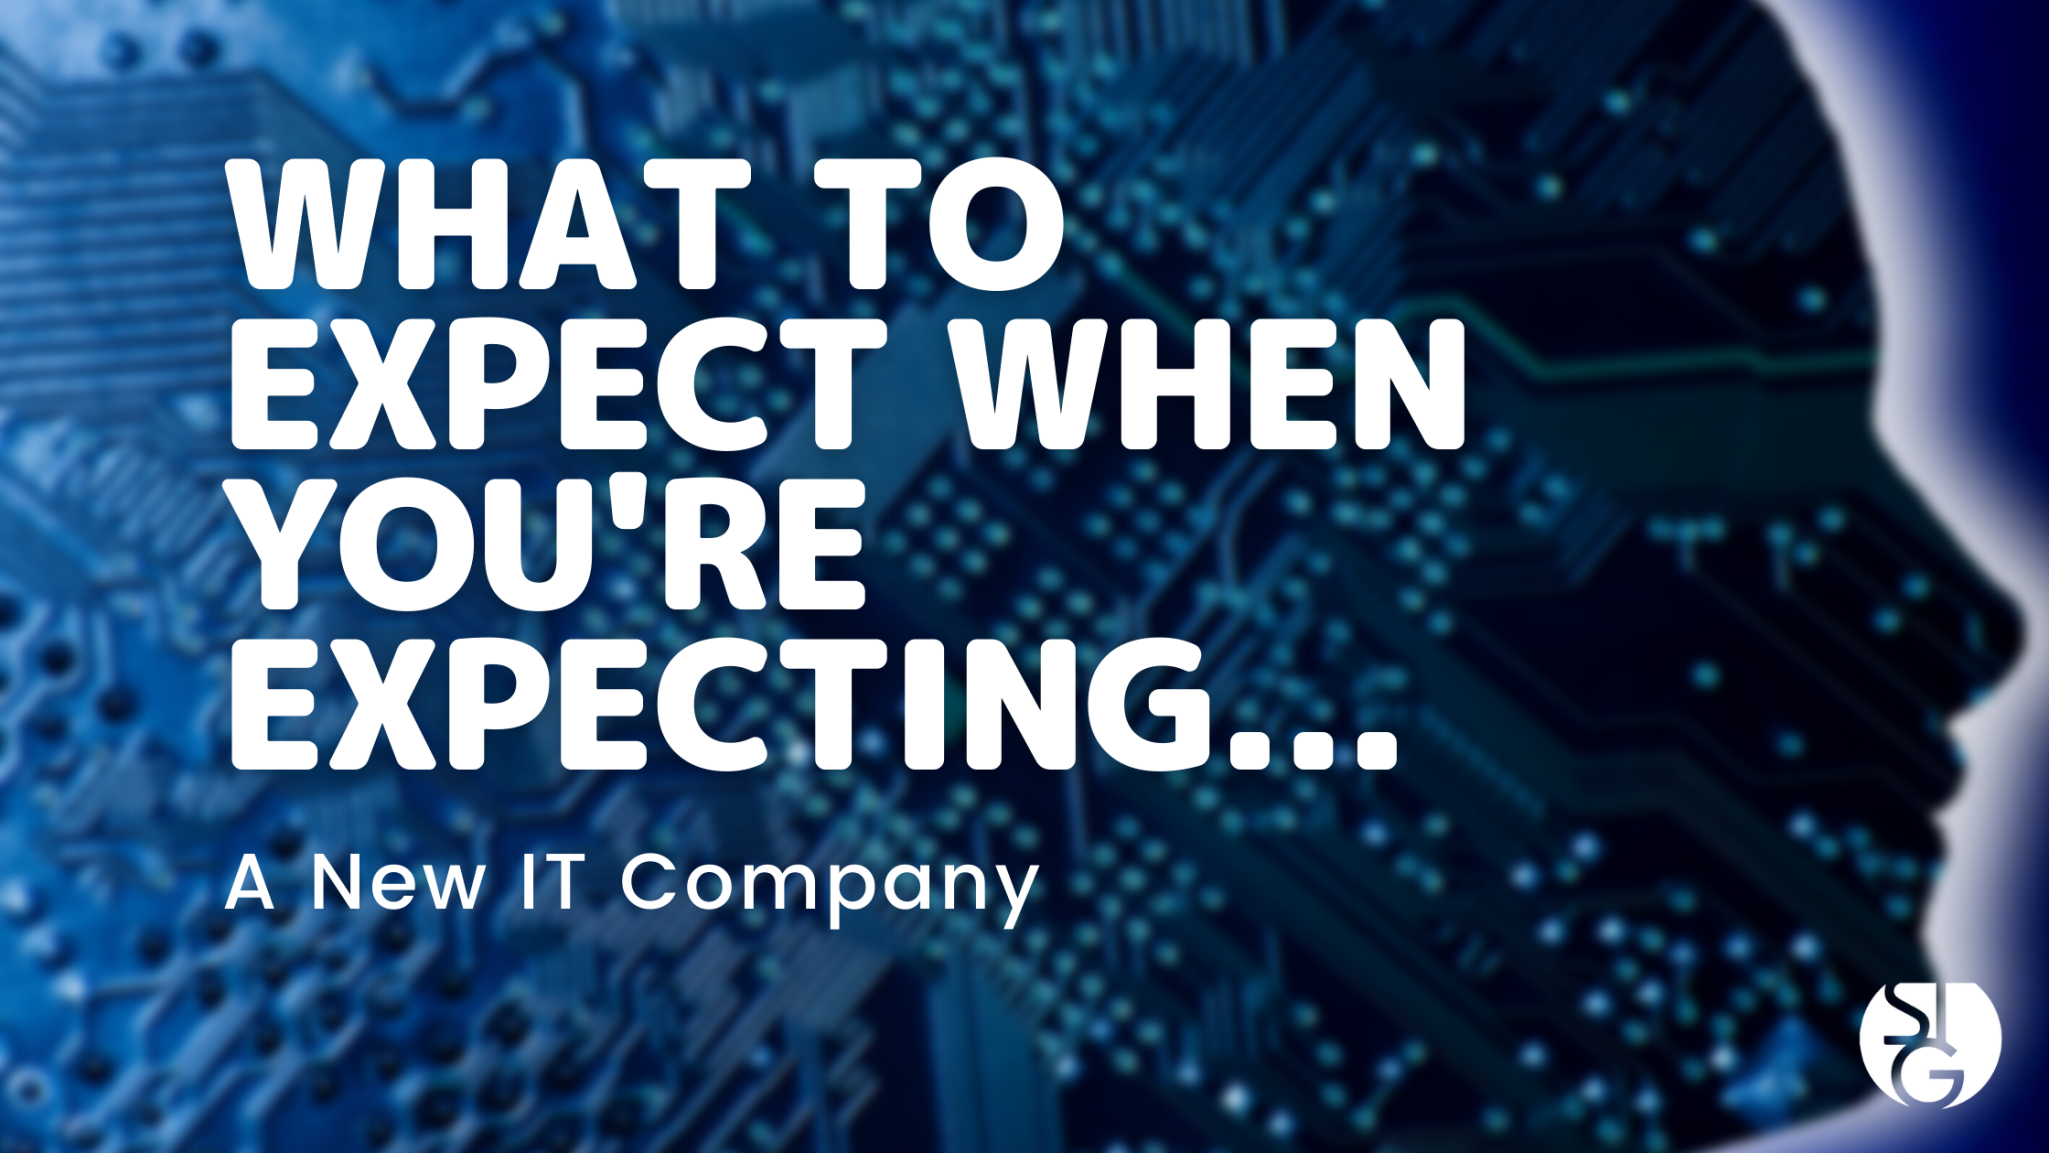 What to Expect When You're Expecting... A New IT Company